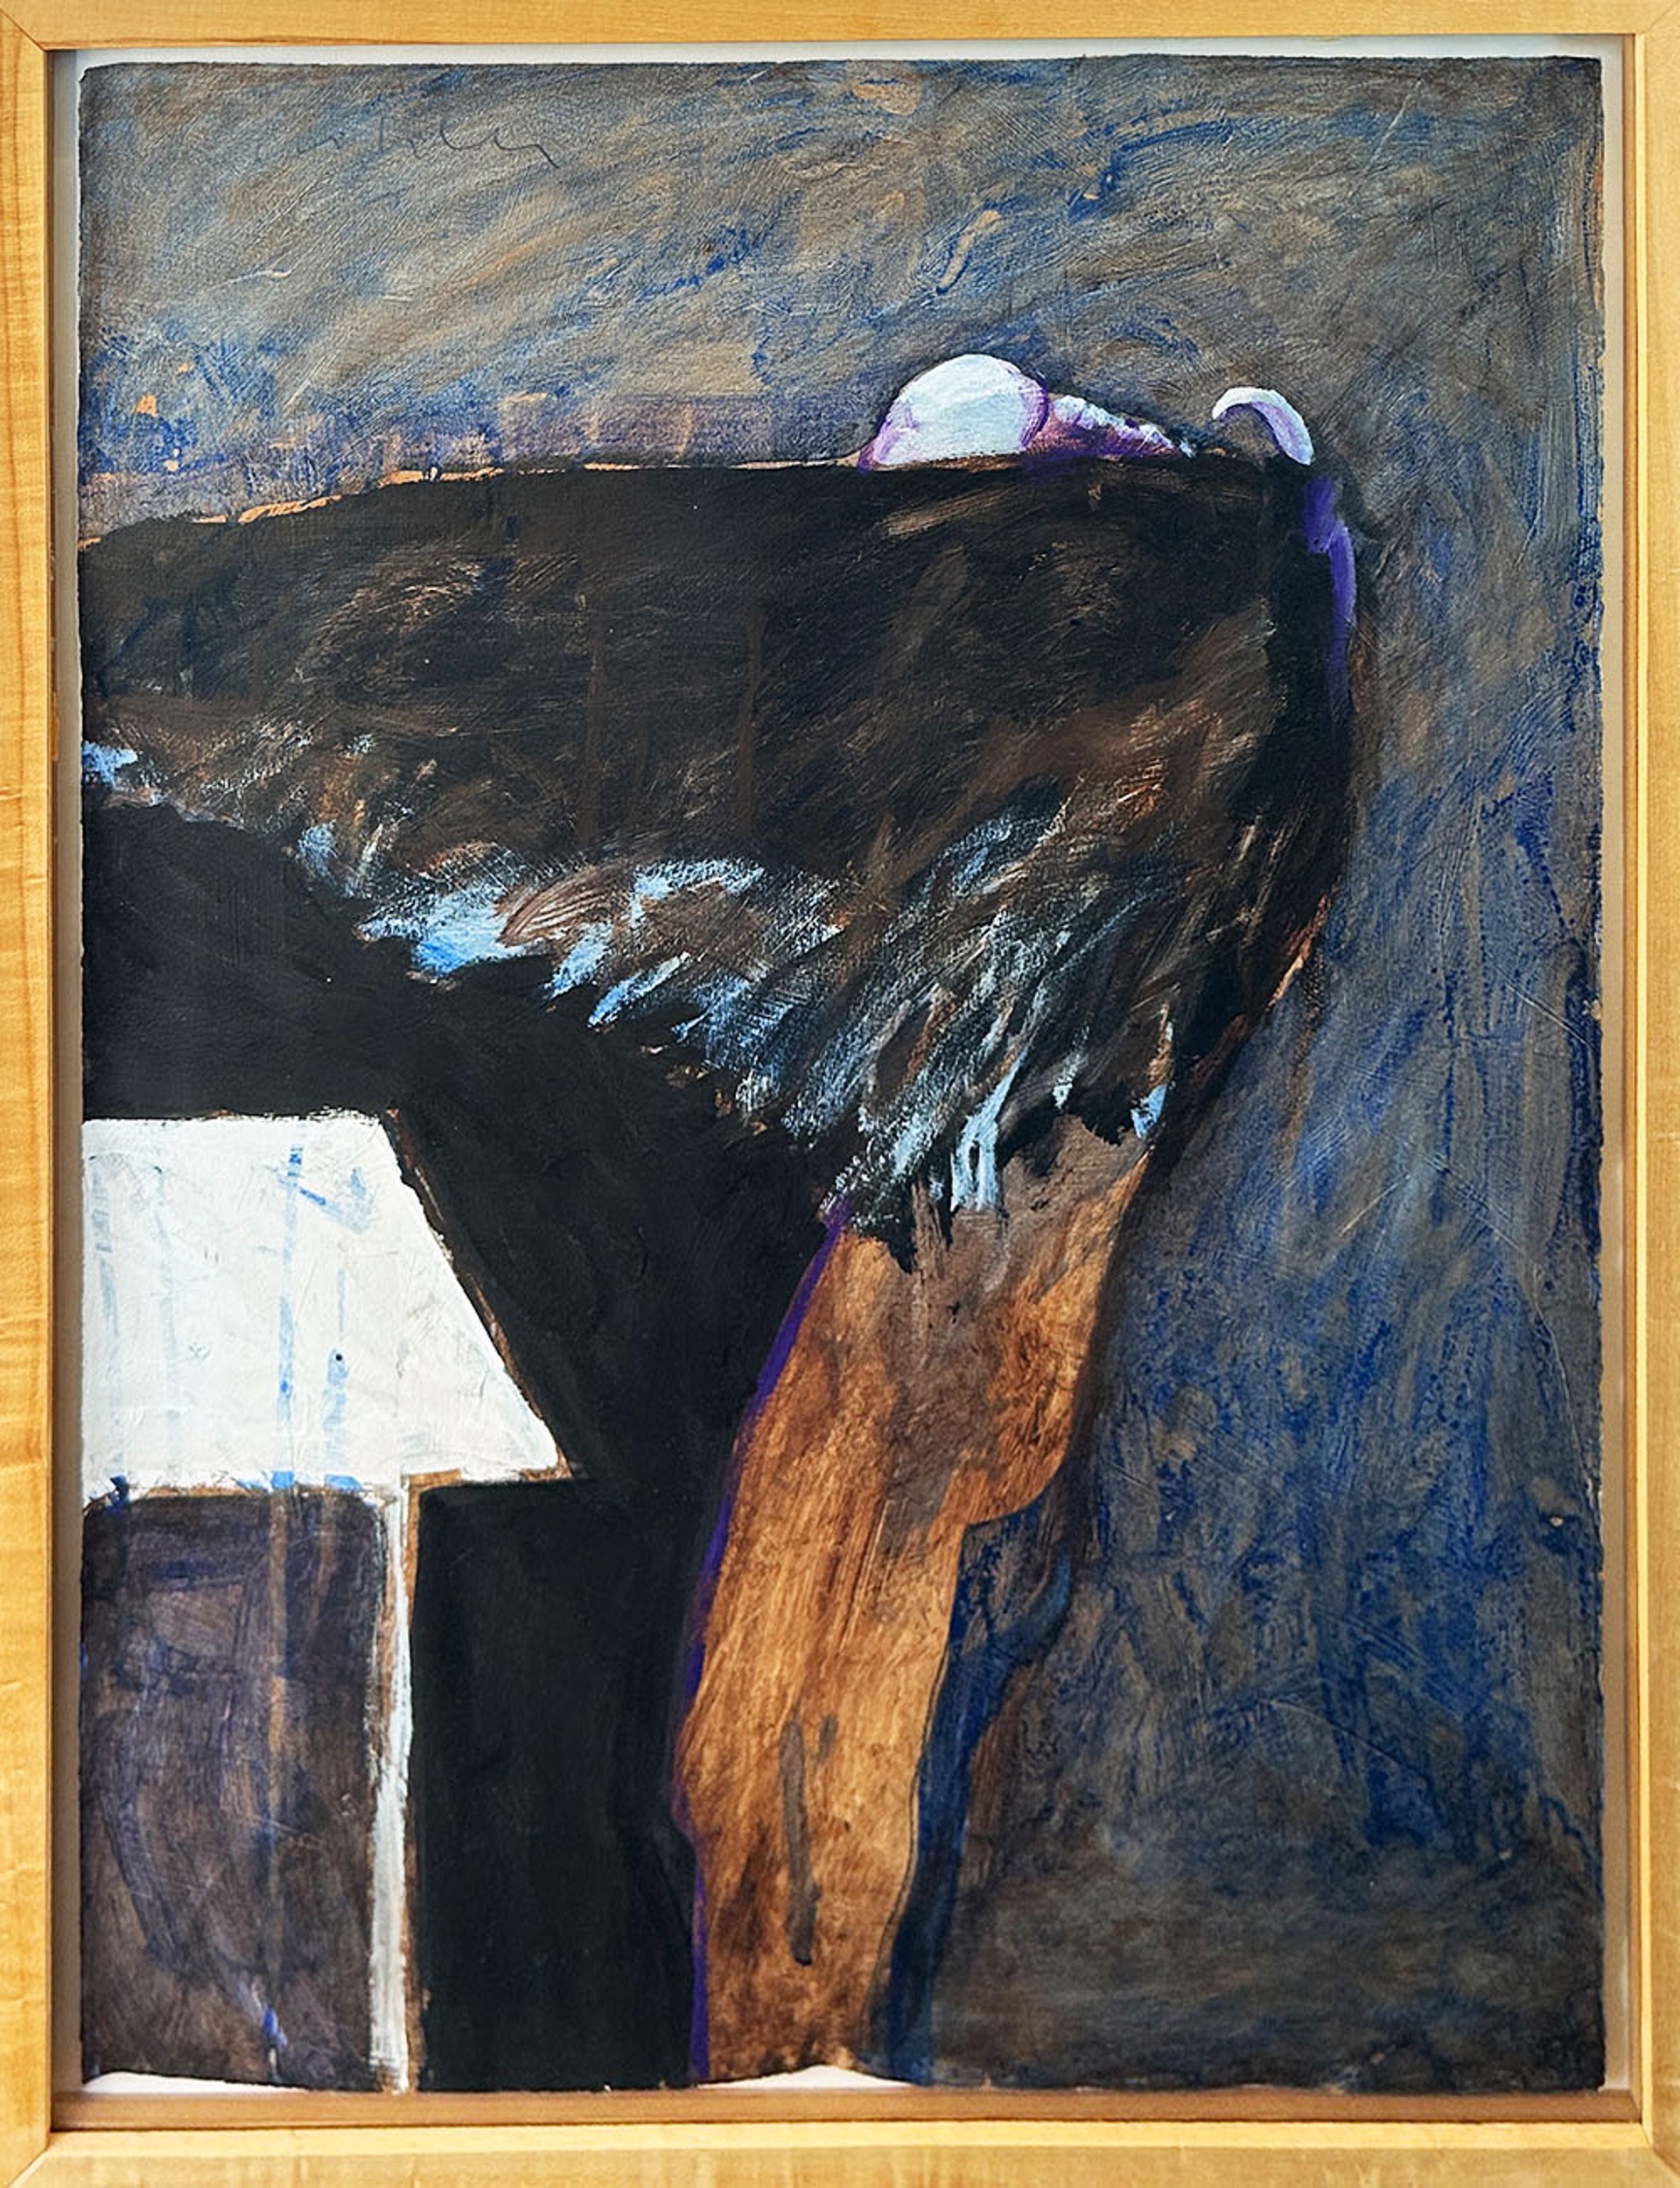 Possession by Fritz Scholder